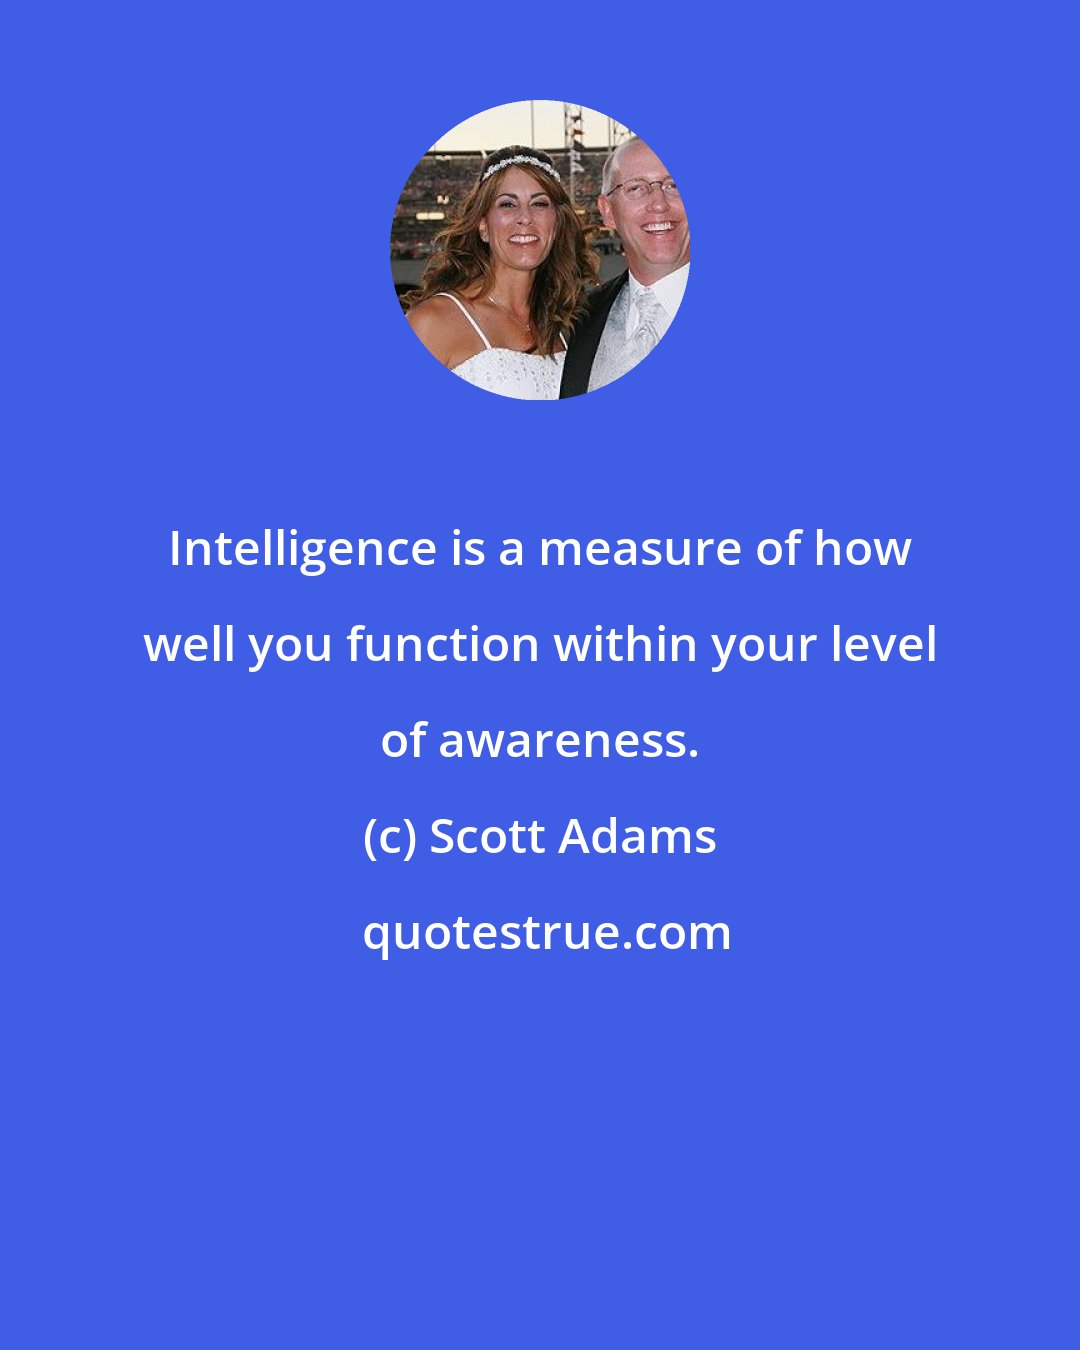 Scott Adams: Intelligence is a measure of how well you function within your level of awareness.